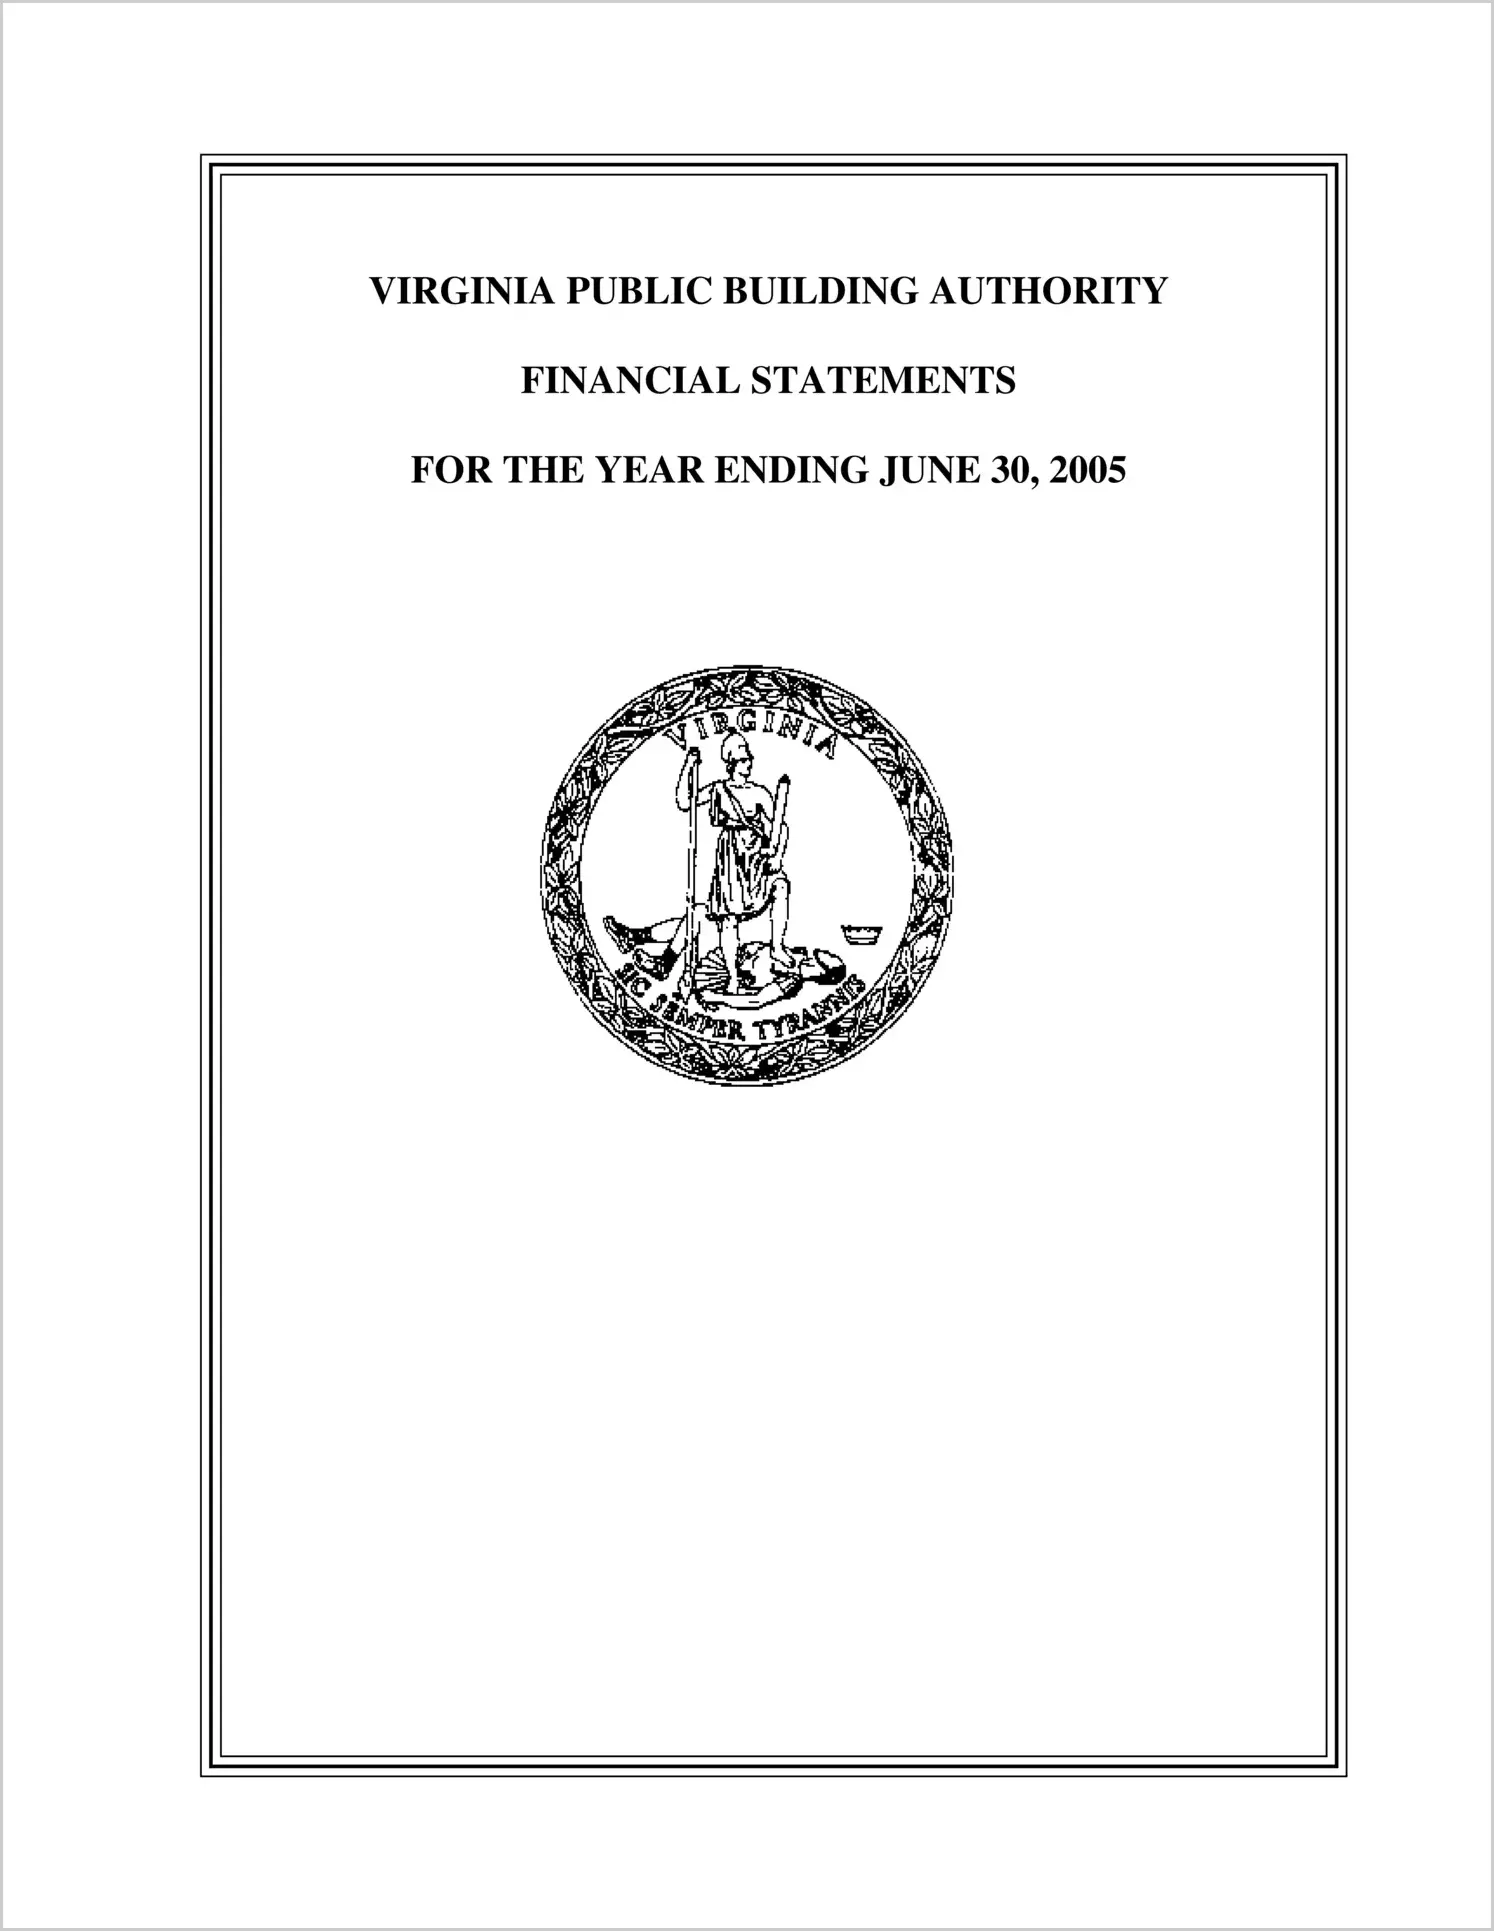 Virginia Public Building Authority for the year ended June 30, 2005